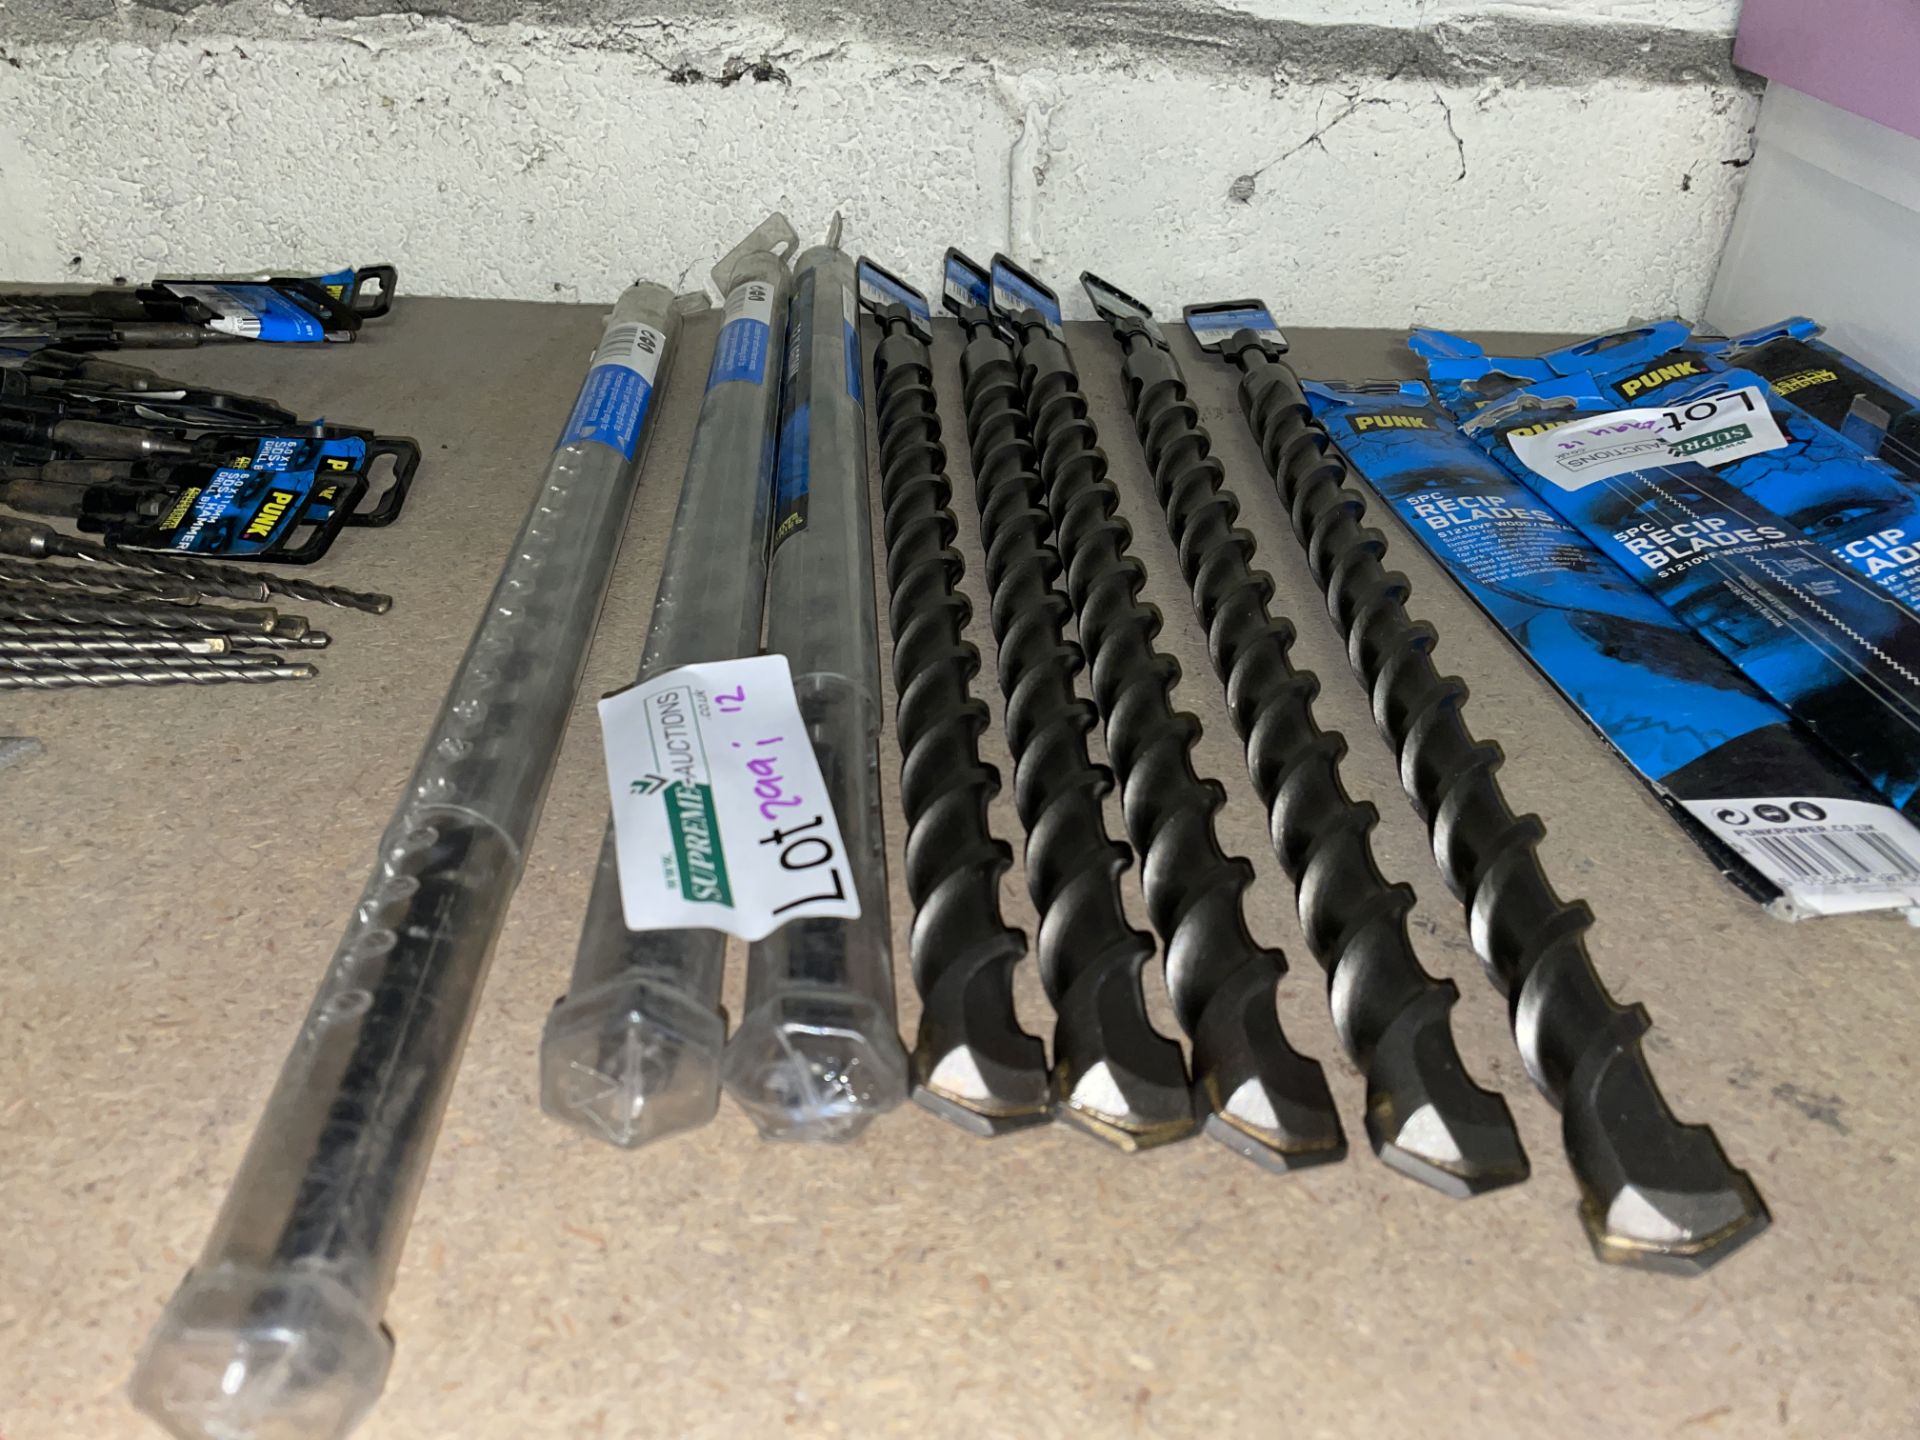 8 PIECE MIXED PUNK TOLLS LOT INCLUDING 12 X 460MM WOOD AUGER DRILL BITS AND 25 X 450MM SDS HAMMER